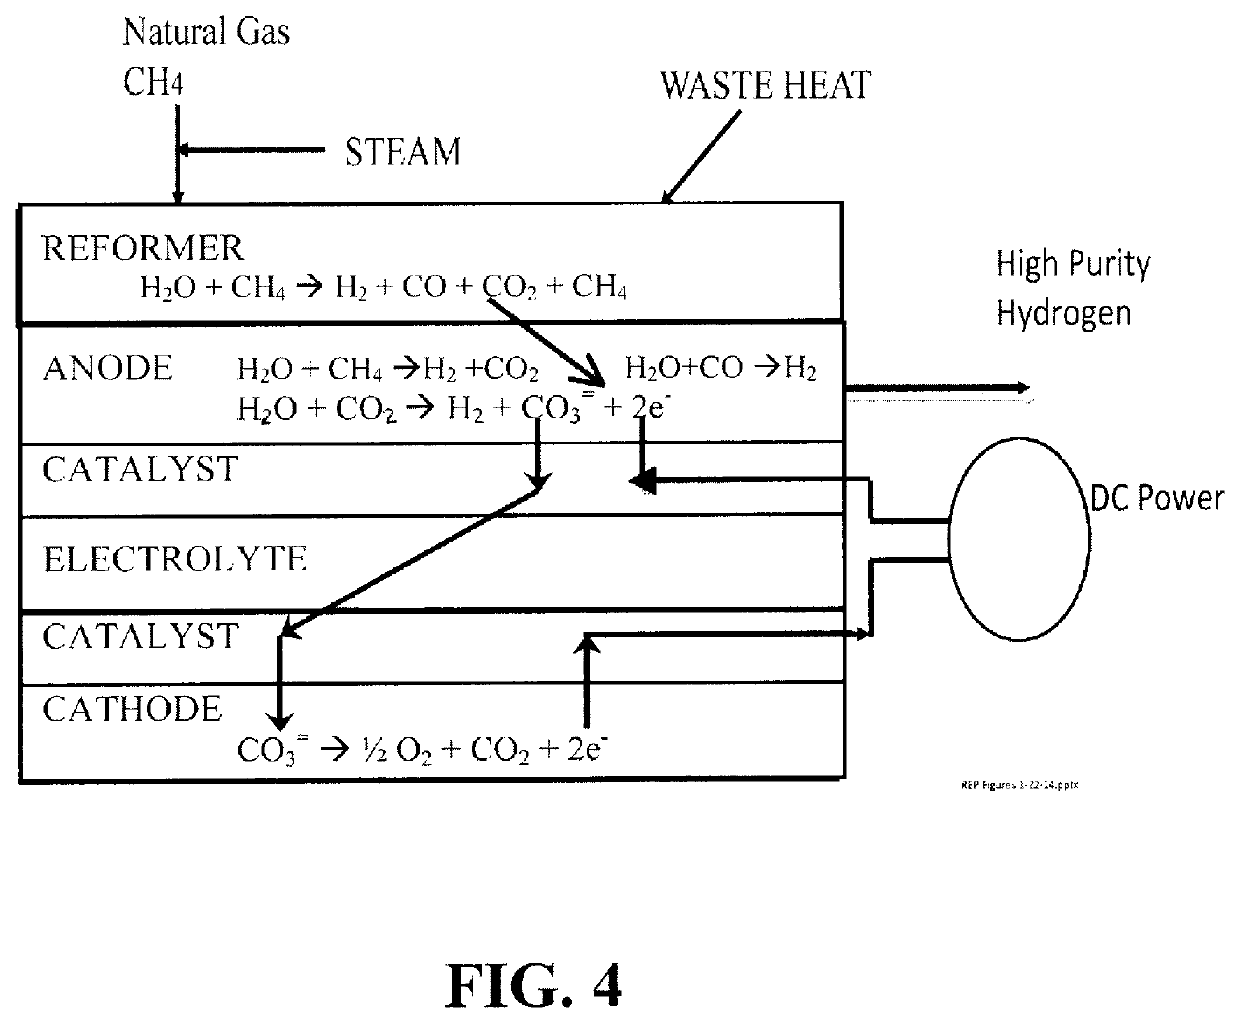 Reformer-electrolyzer-purifier (REP) assembly for hydrogen production, systems incorporating same and method of producing hydrogen